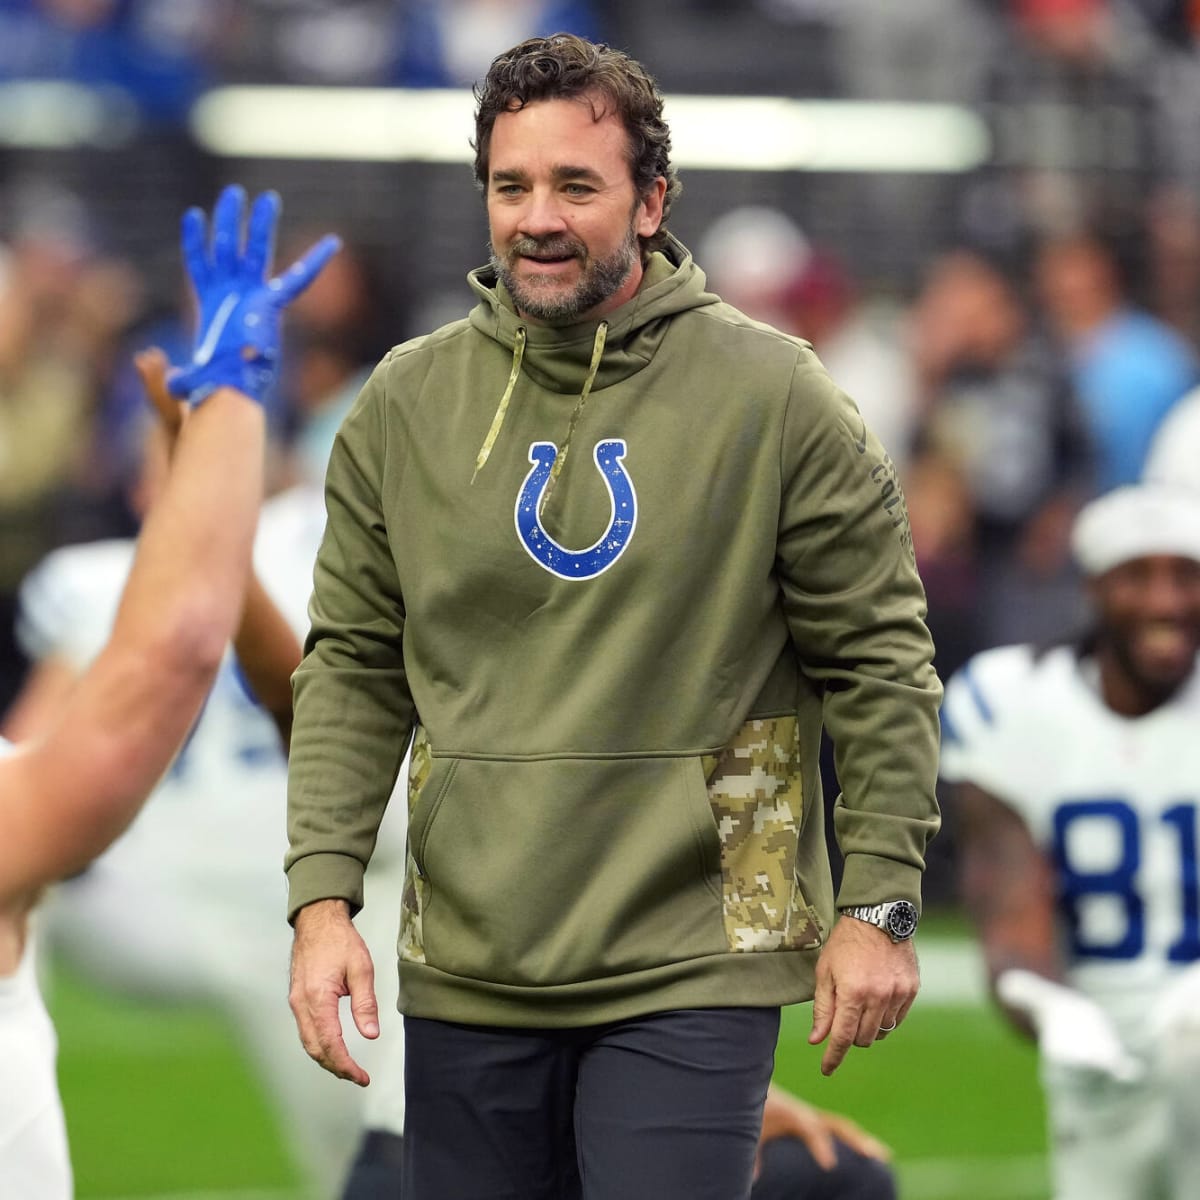 Jeff Saturday responds to Bill Cowher calling hiring 'a disgrace